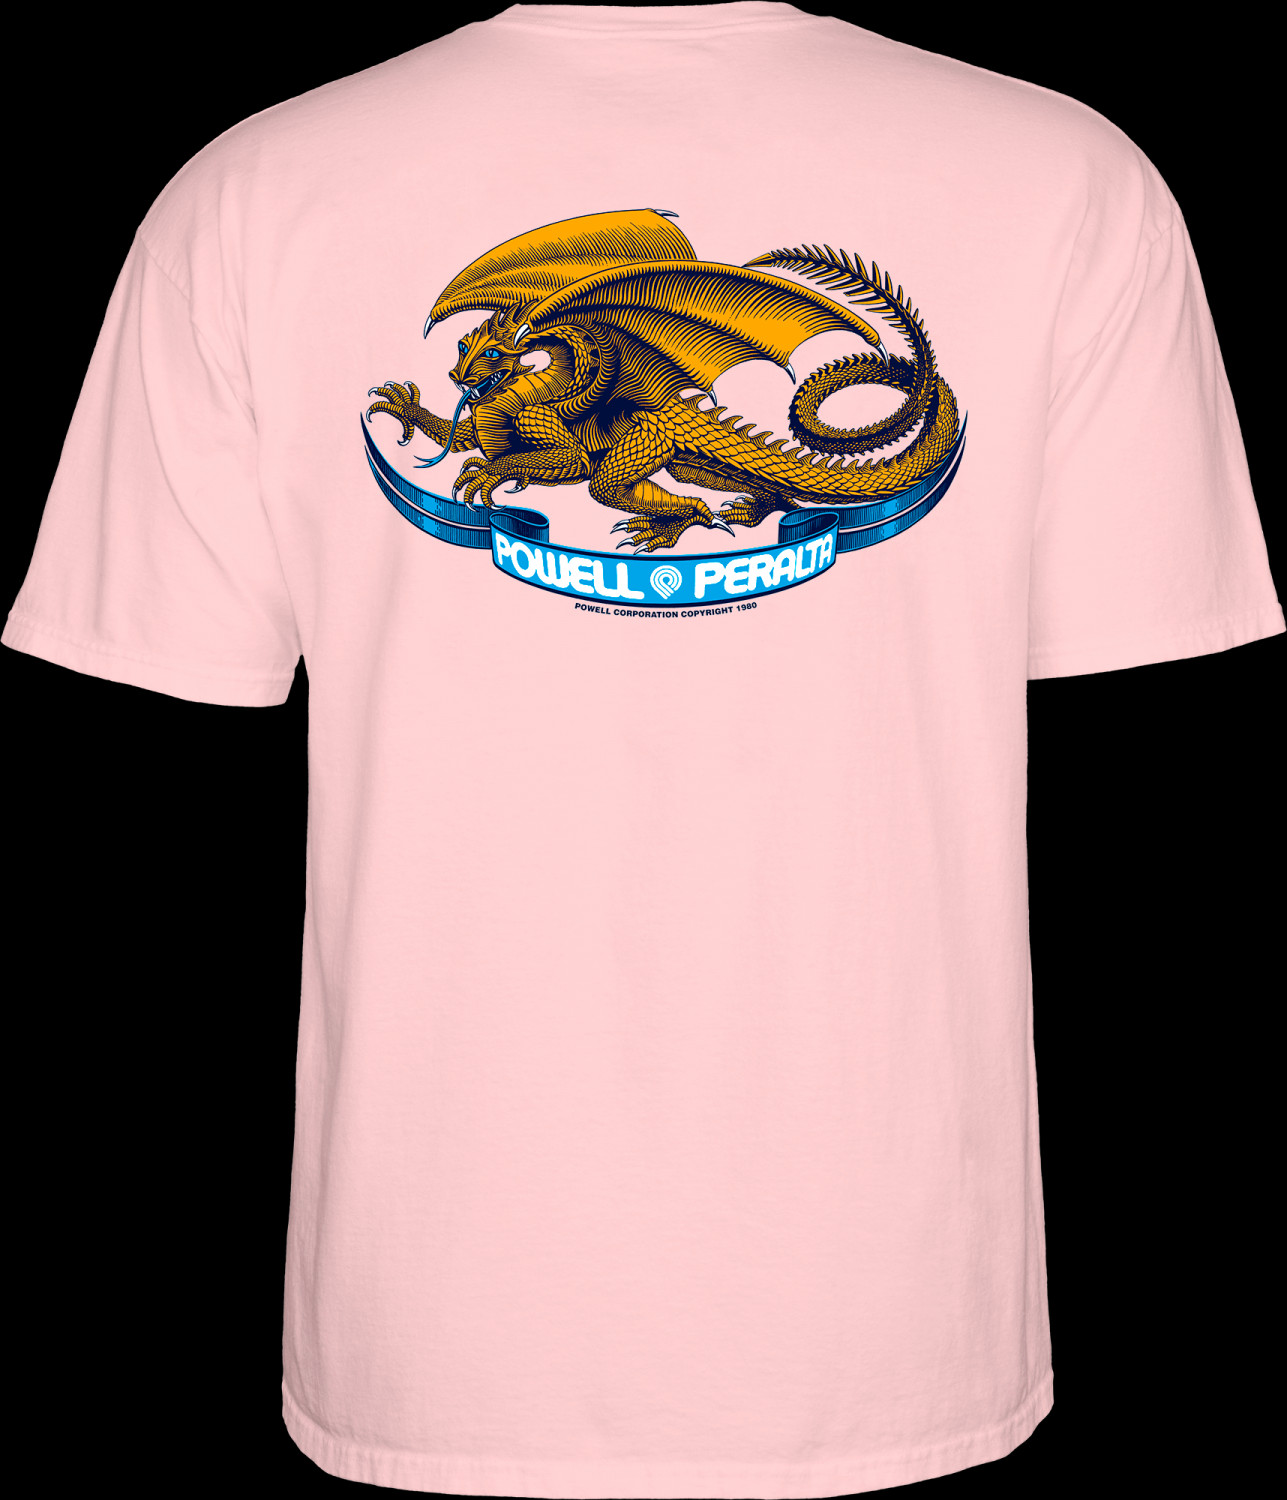 Powell Peralta Oval Dragon Youth T-Shirt Light Pink Photo #1 - Photo ...